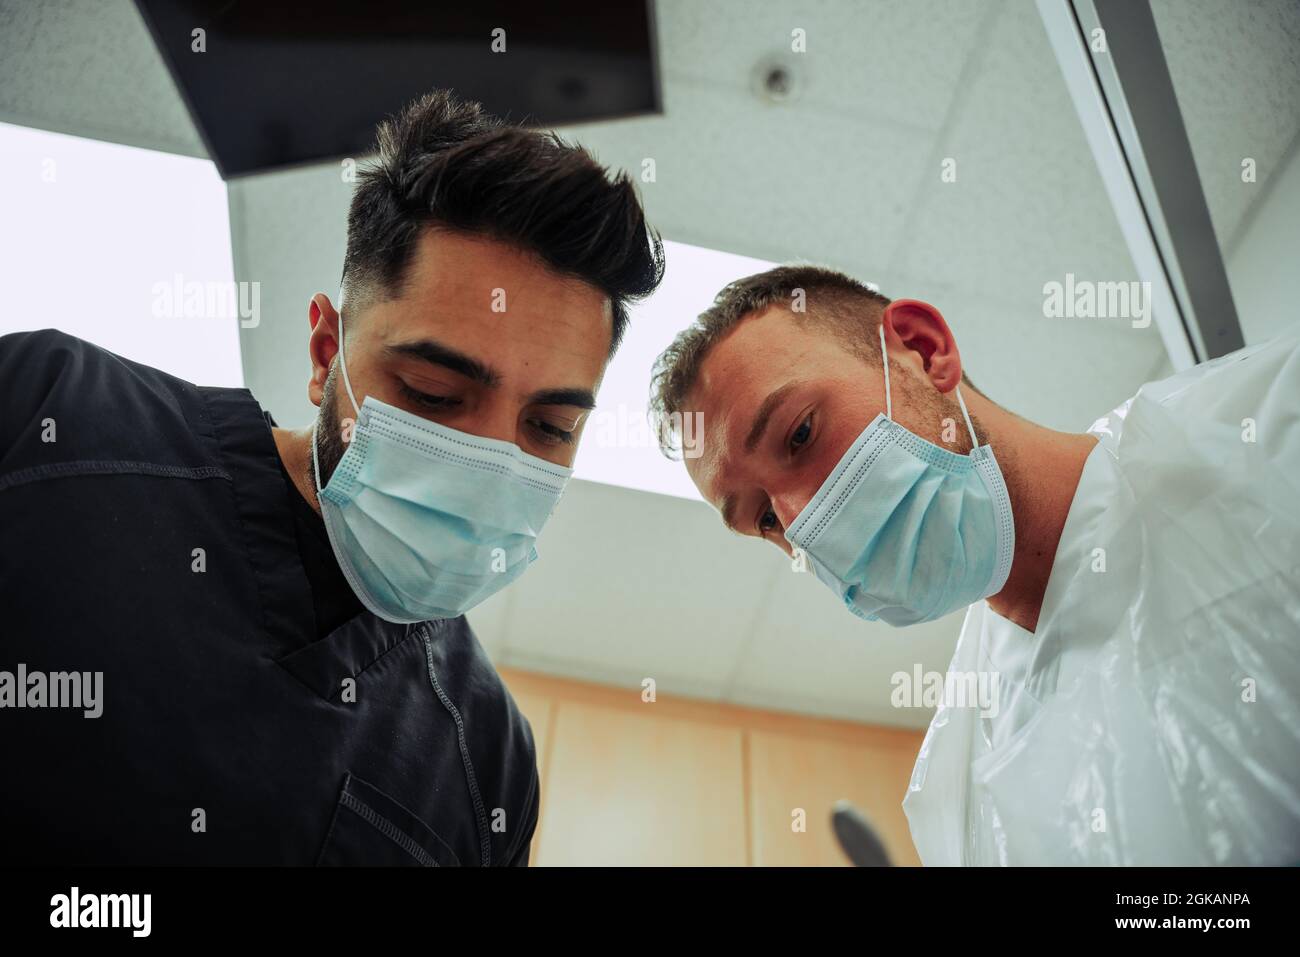 Two caucasian male doctors wearing surgical gear looking down on patient Stock Photo